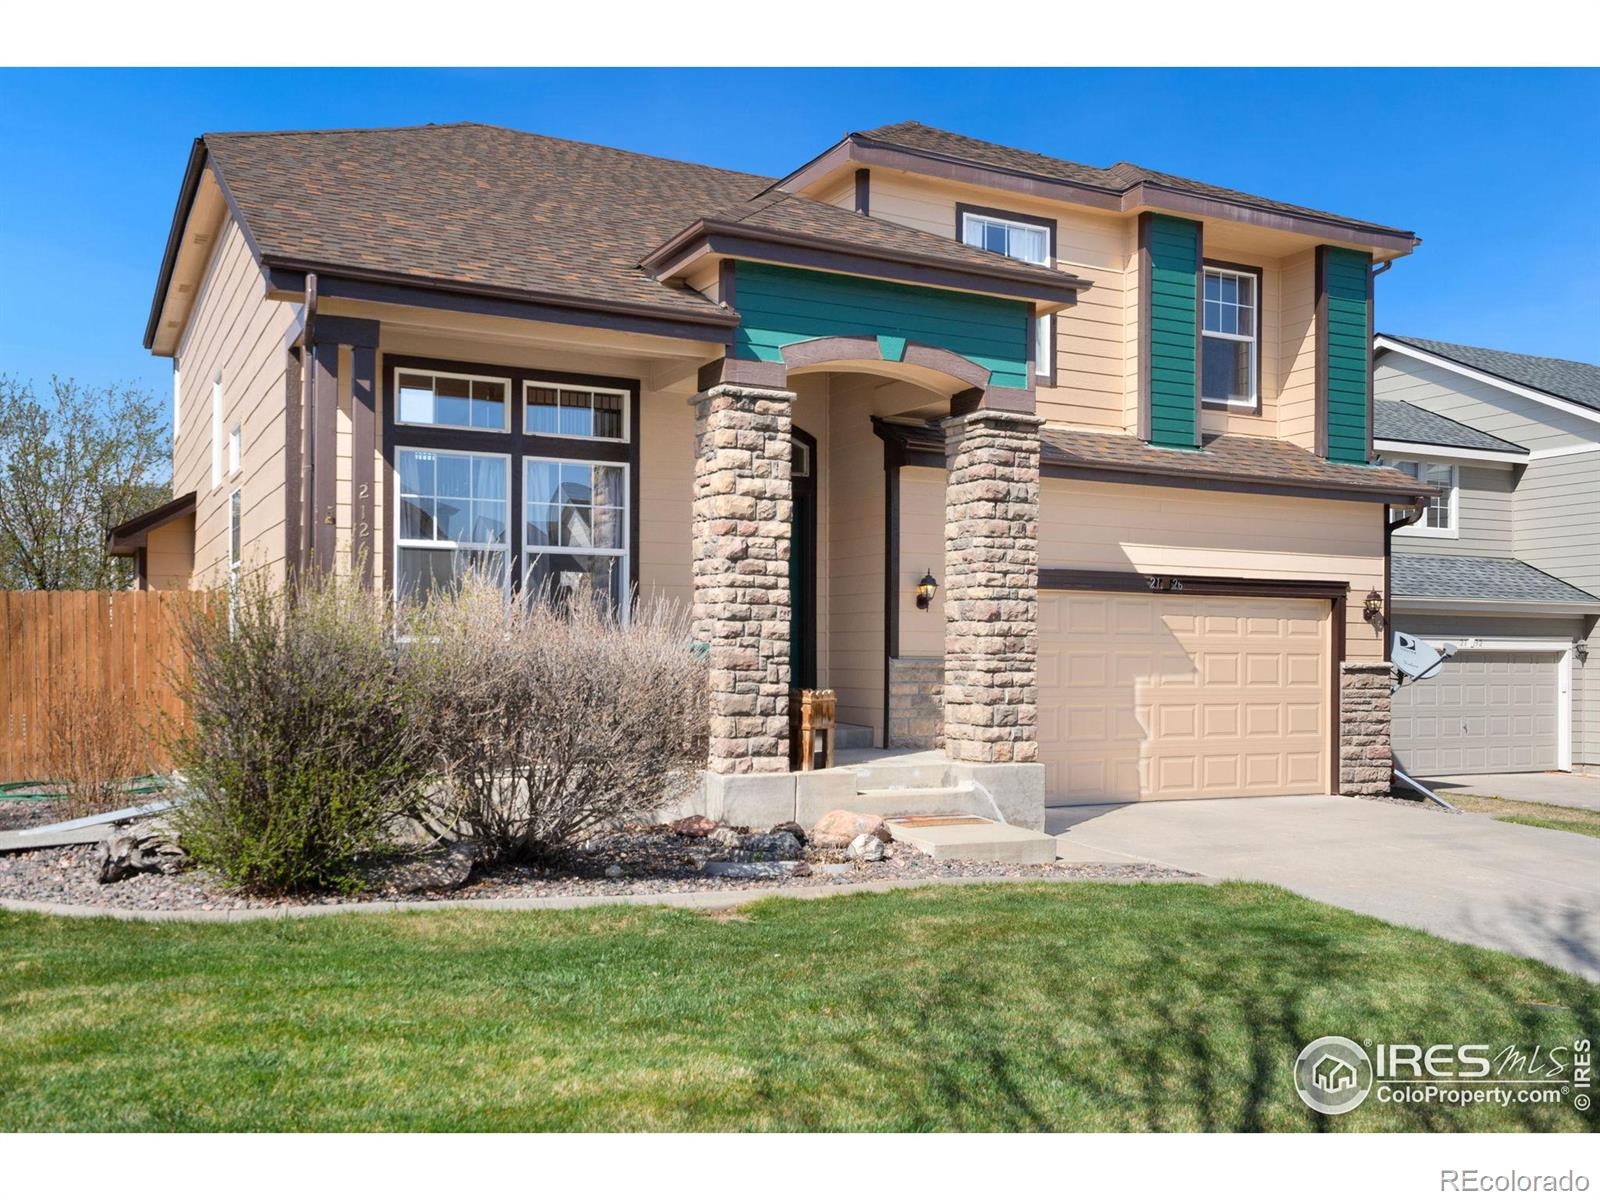 2126  Mainsail Drive, fort collins MLS: 4567891007052 Beds: 3 Baths: 3 Price: $568,500